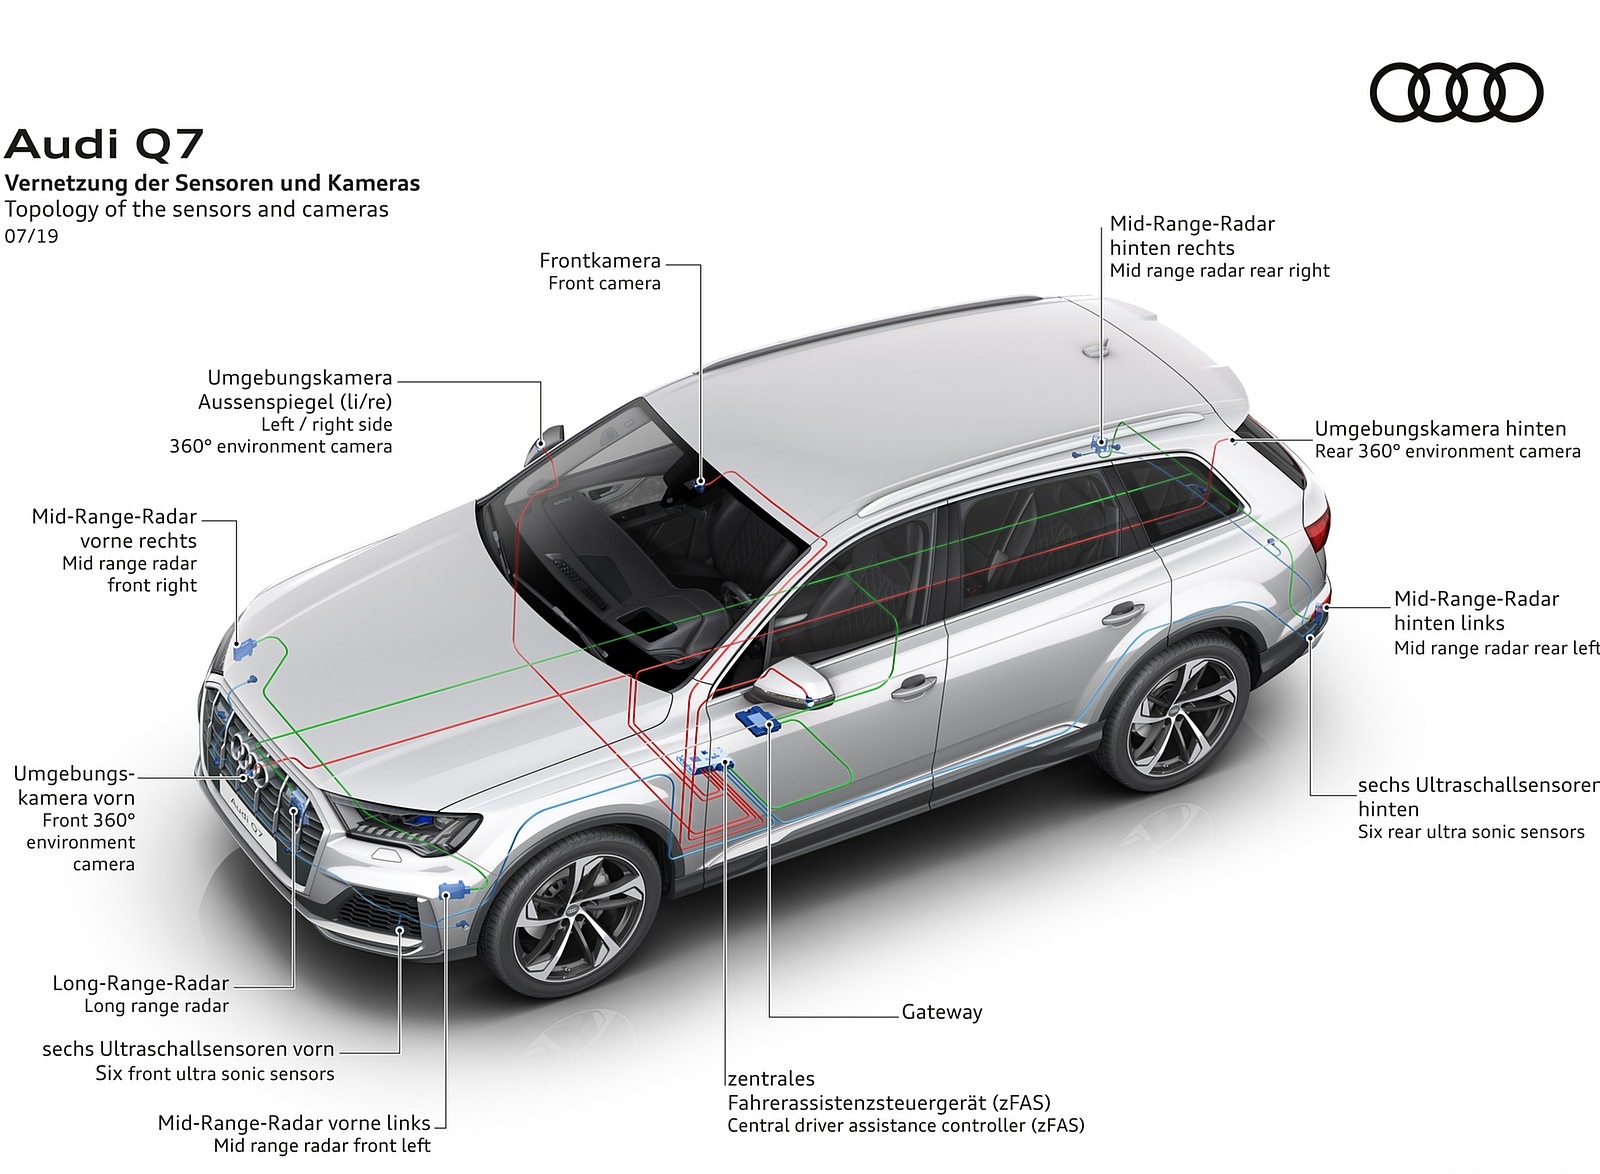 2020 Audi Q7 Topology of the sensors and cameras Wallpapers #114 of 158